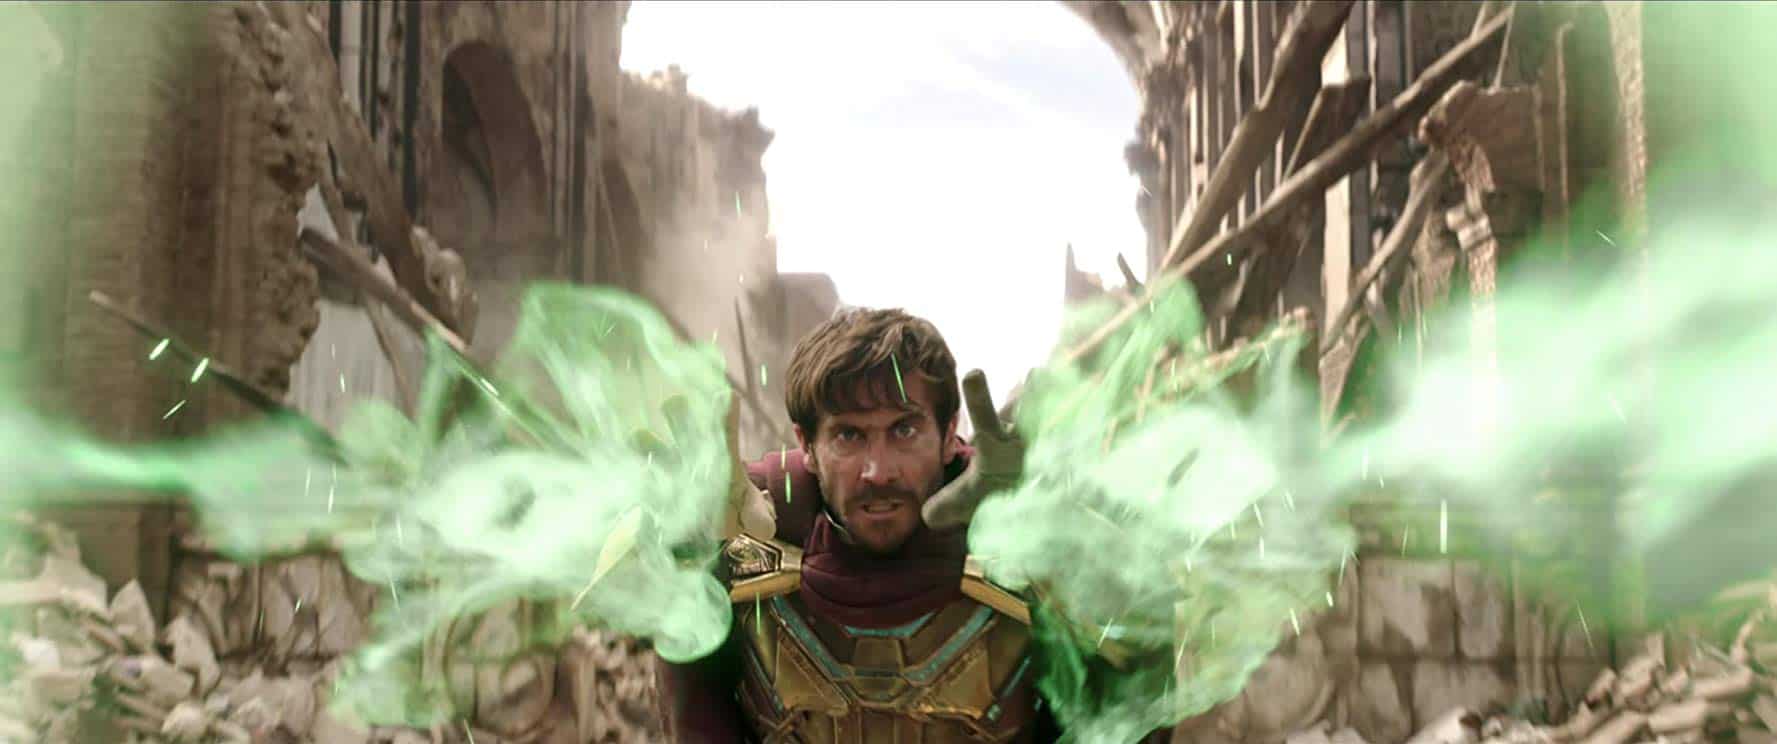 Upcoming MCU Marvel Movies in 2019 & 2020 - Mysterio